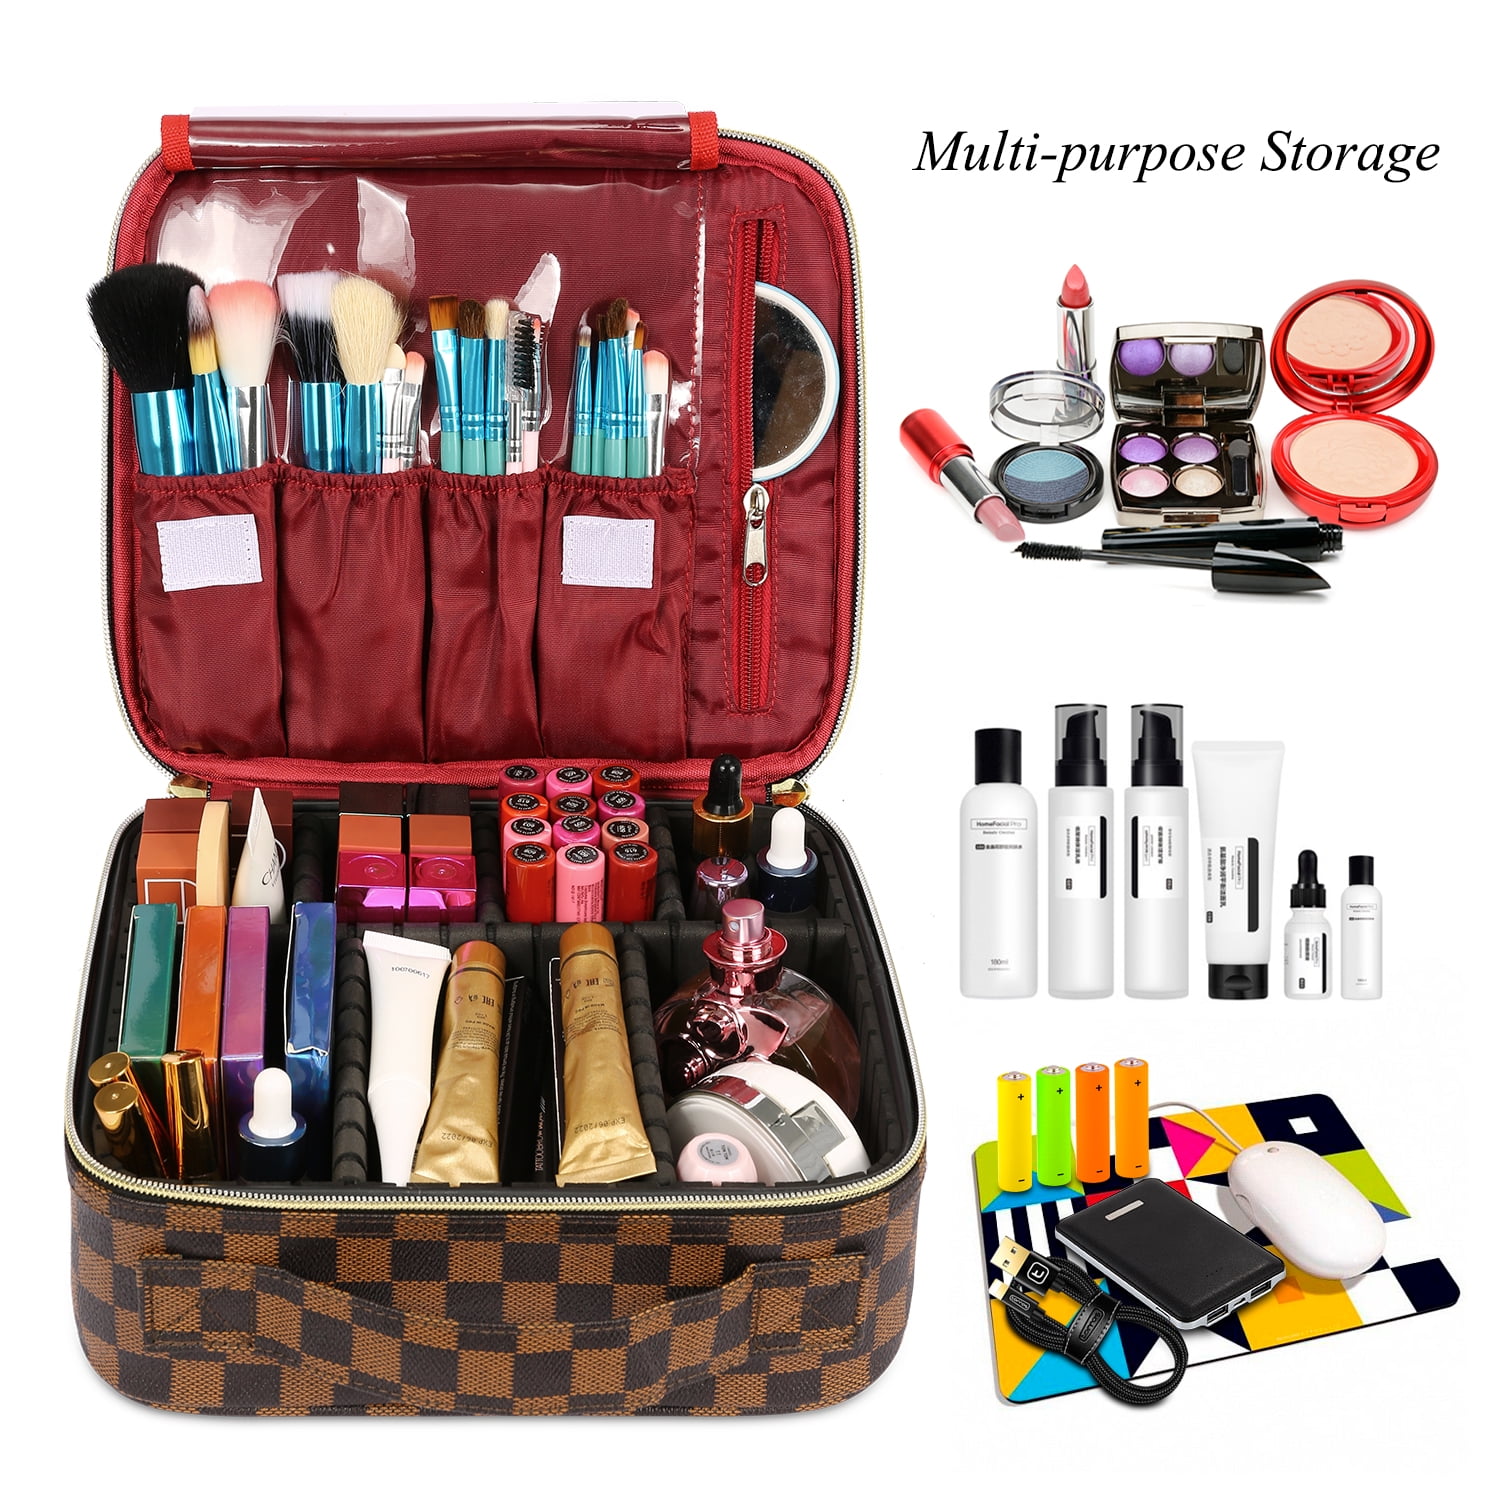 Qepwscx Makeup Bag Checkered Makeup Bag Travel Toiletry Bag Checkered Cosmetic  Bag Portable Makeup Bags Pouch Travel Organizer Cases For Women Girls  Vacation Travel Cosmetic Bag Travel Essentials Cle 